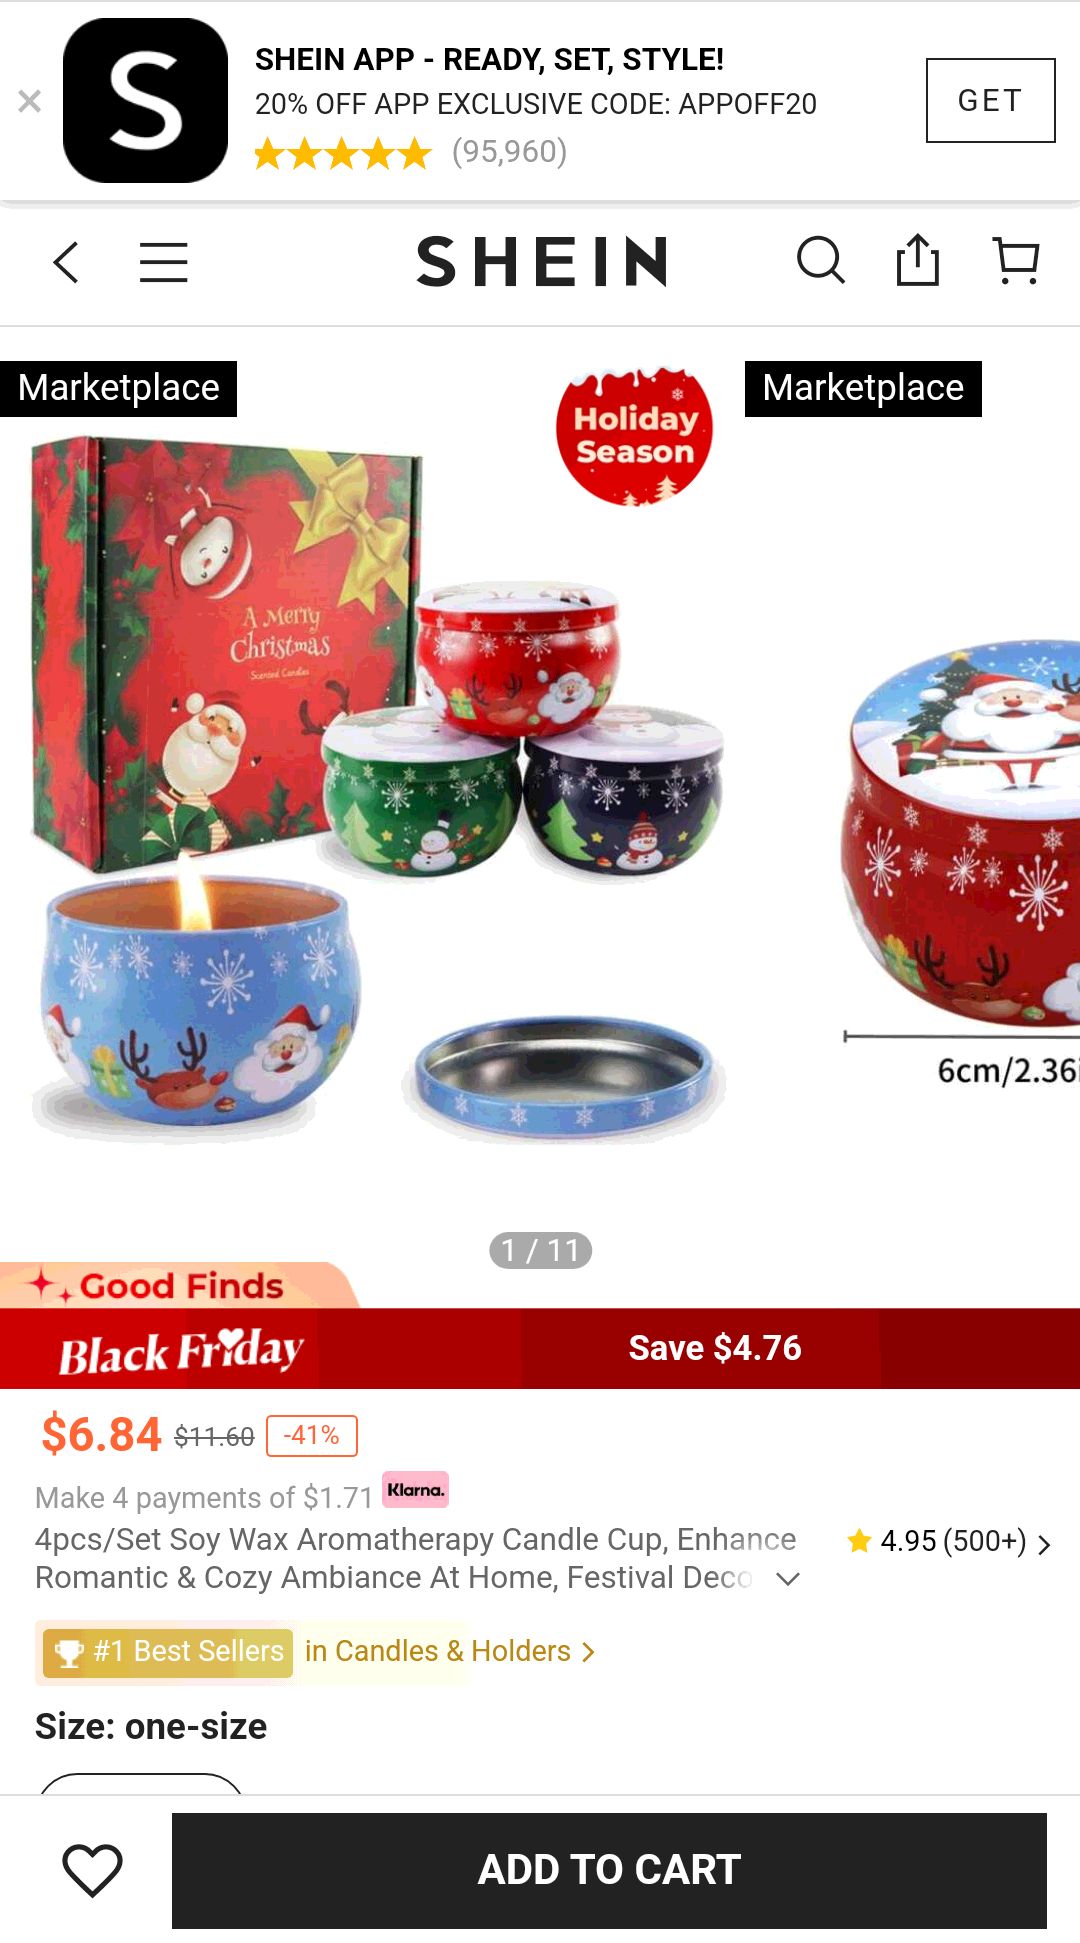 4pcs/set Soy Wax Aromatherapy Candle Cup, Enhance Romantic & Cozy Ambiance At Home, Festival Decoration, Perfect Gift For Family & Friends On Christmas & Thanksgiving | SHEIN USA